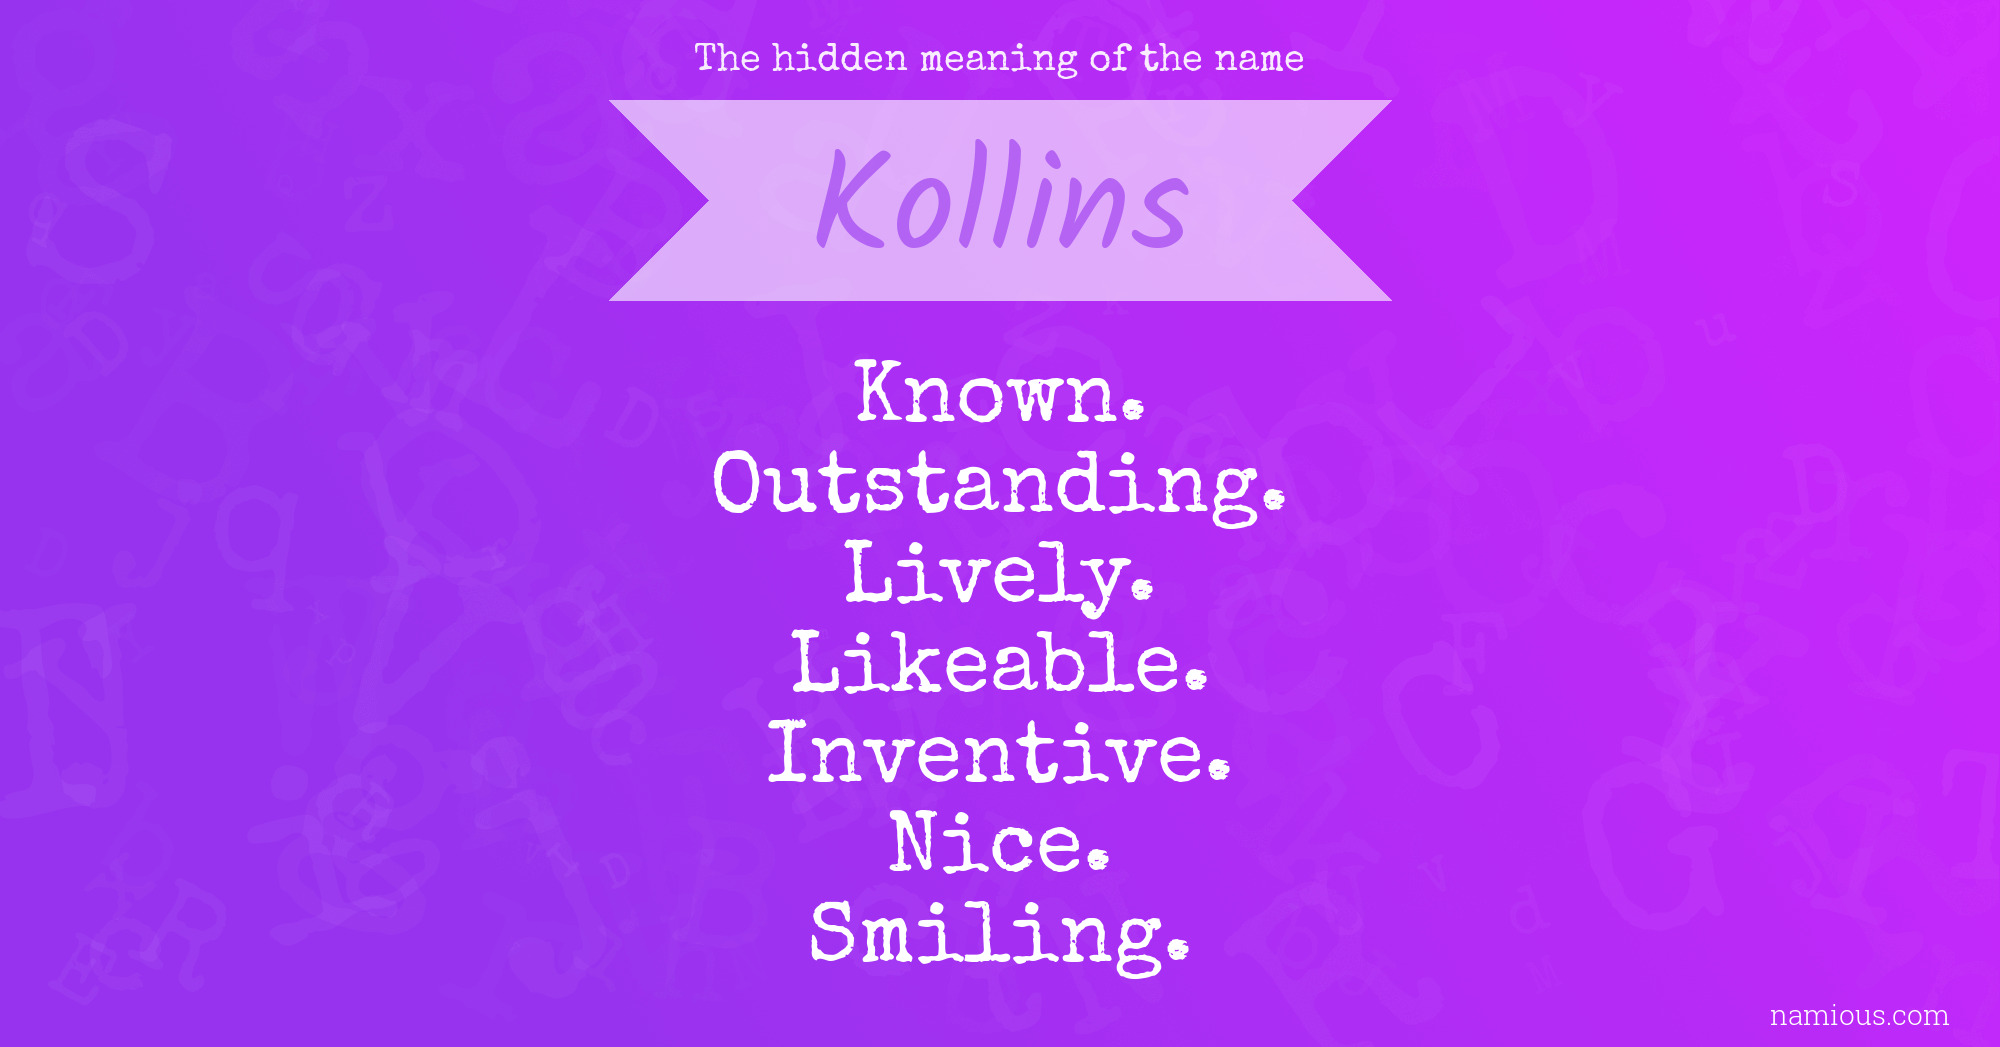 The hidden meaning of the name Kollins